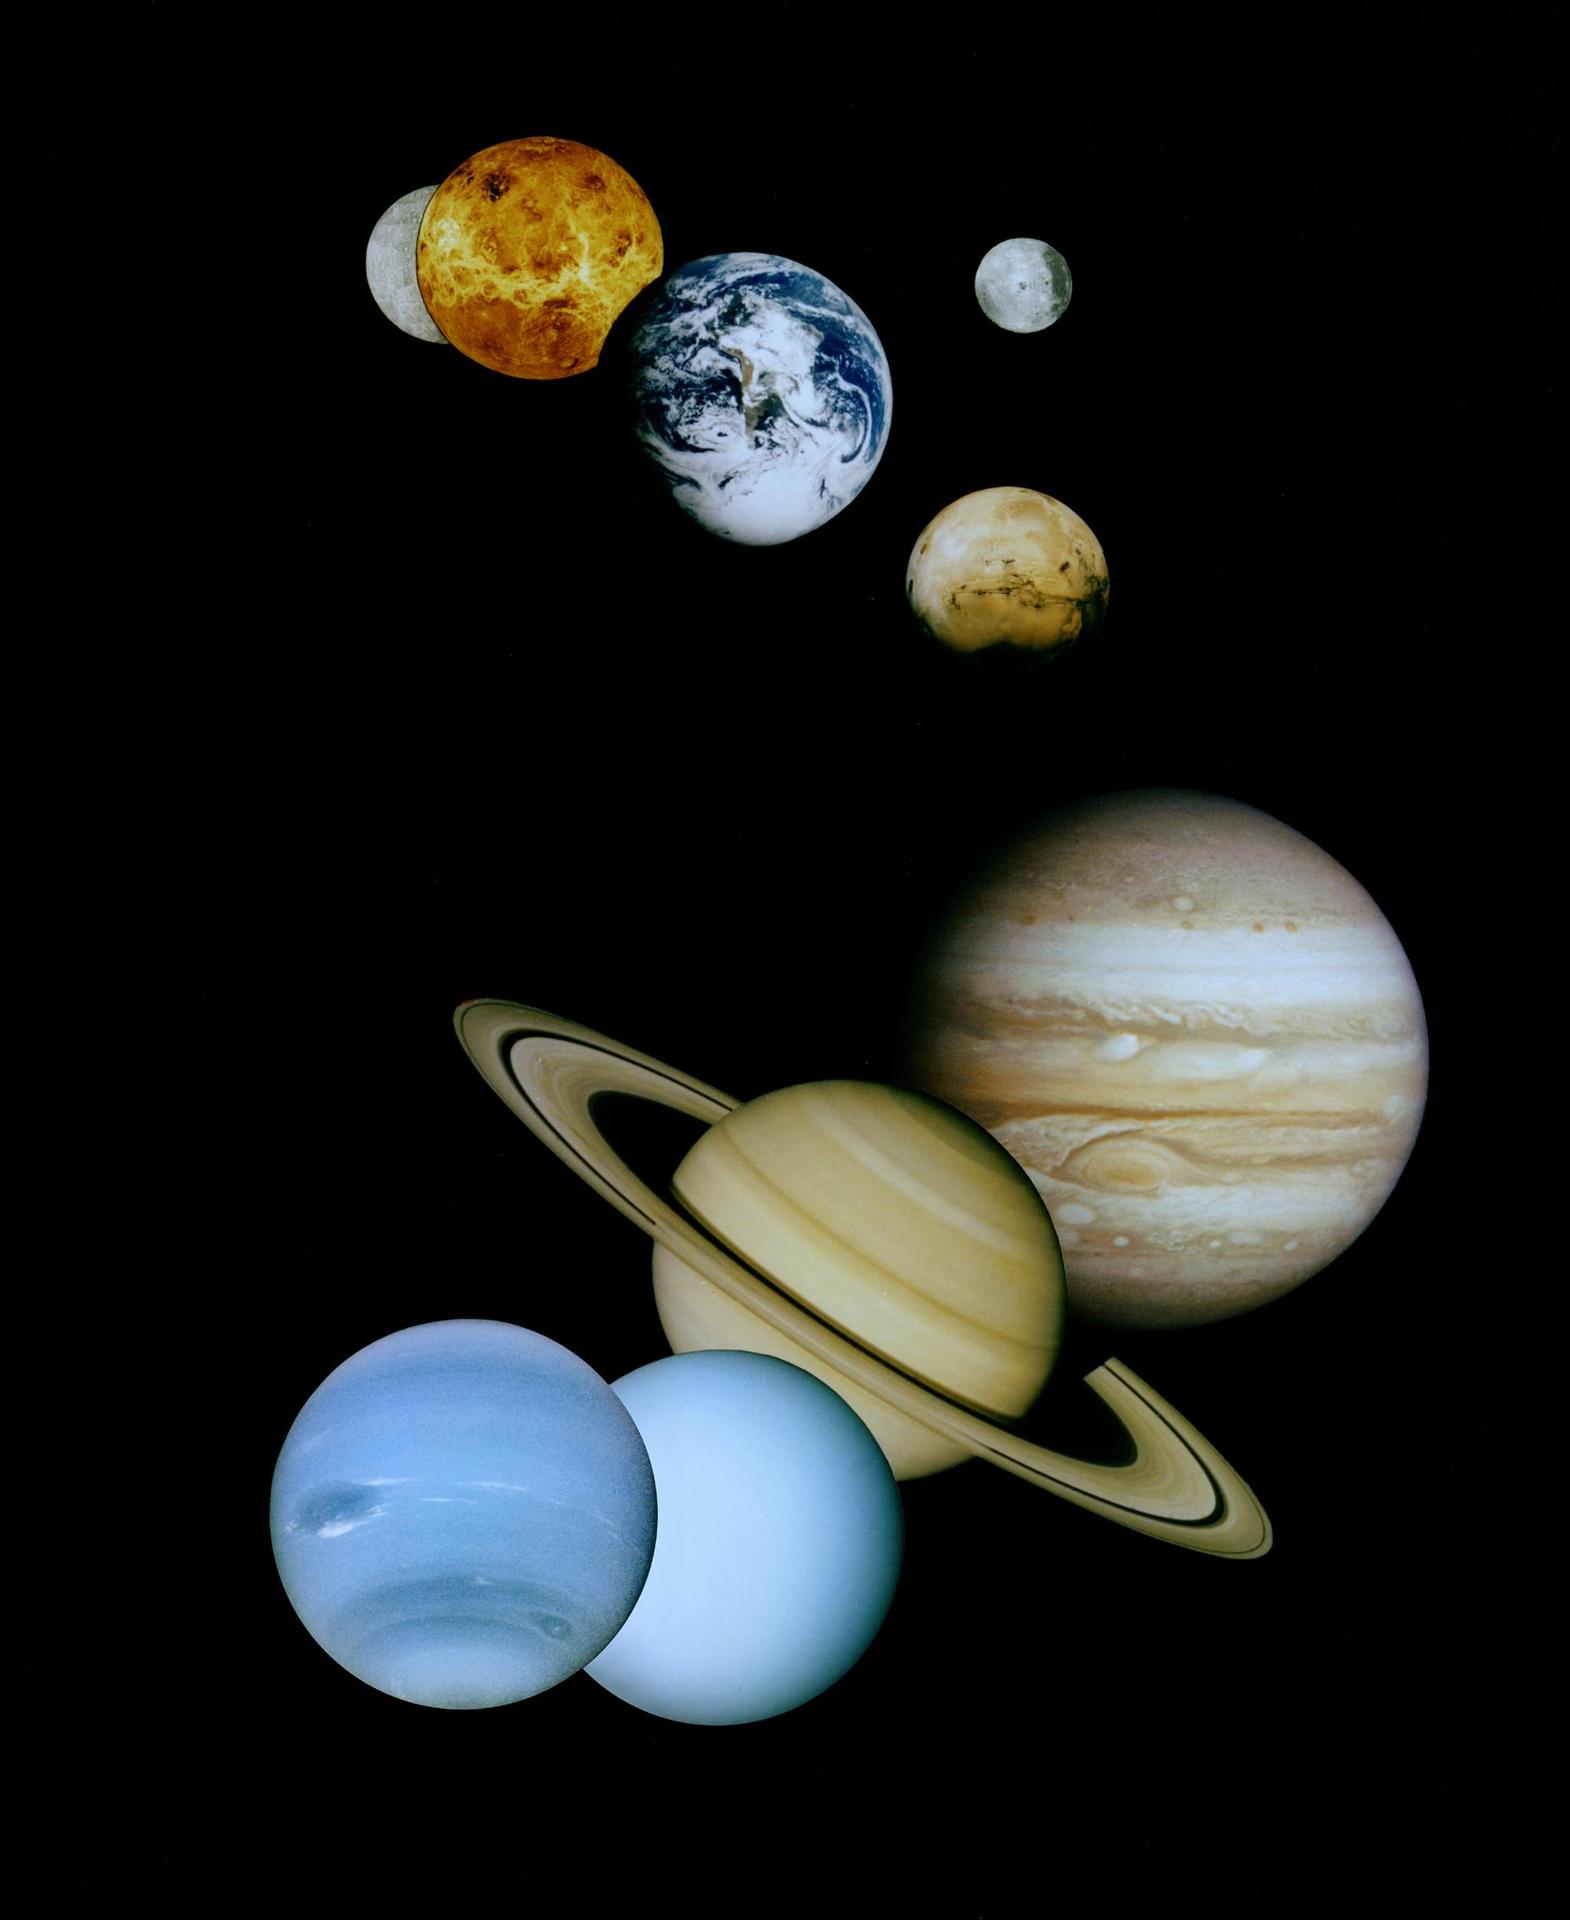 This is an updated montage of planetary images taken by spacecraft managed by NASA’s Jet Propulsion Laboratory in Pasadena, CA. Included are from top to bottom images of Mercury, Venus, Earth and Moon, Mars, Jupiter, Saturn, Uranus and Neptune.